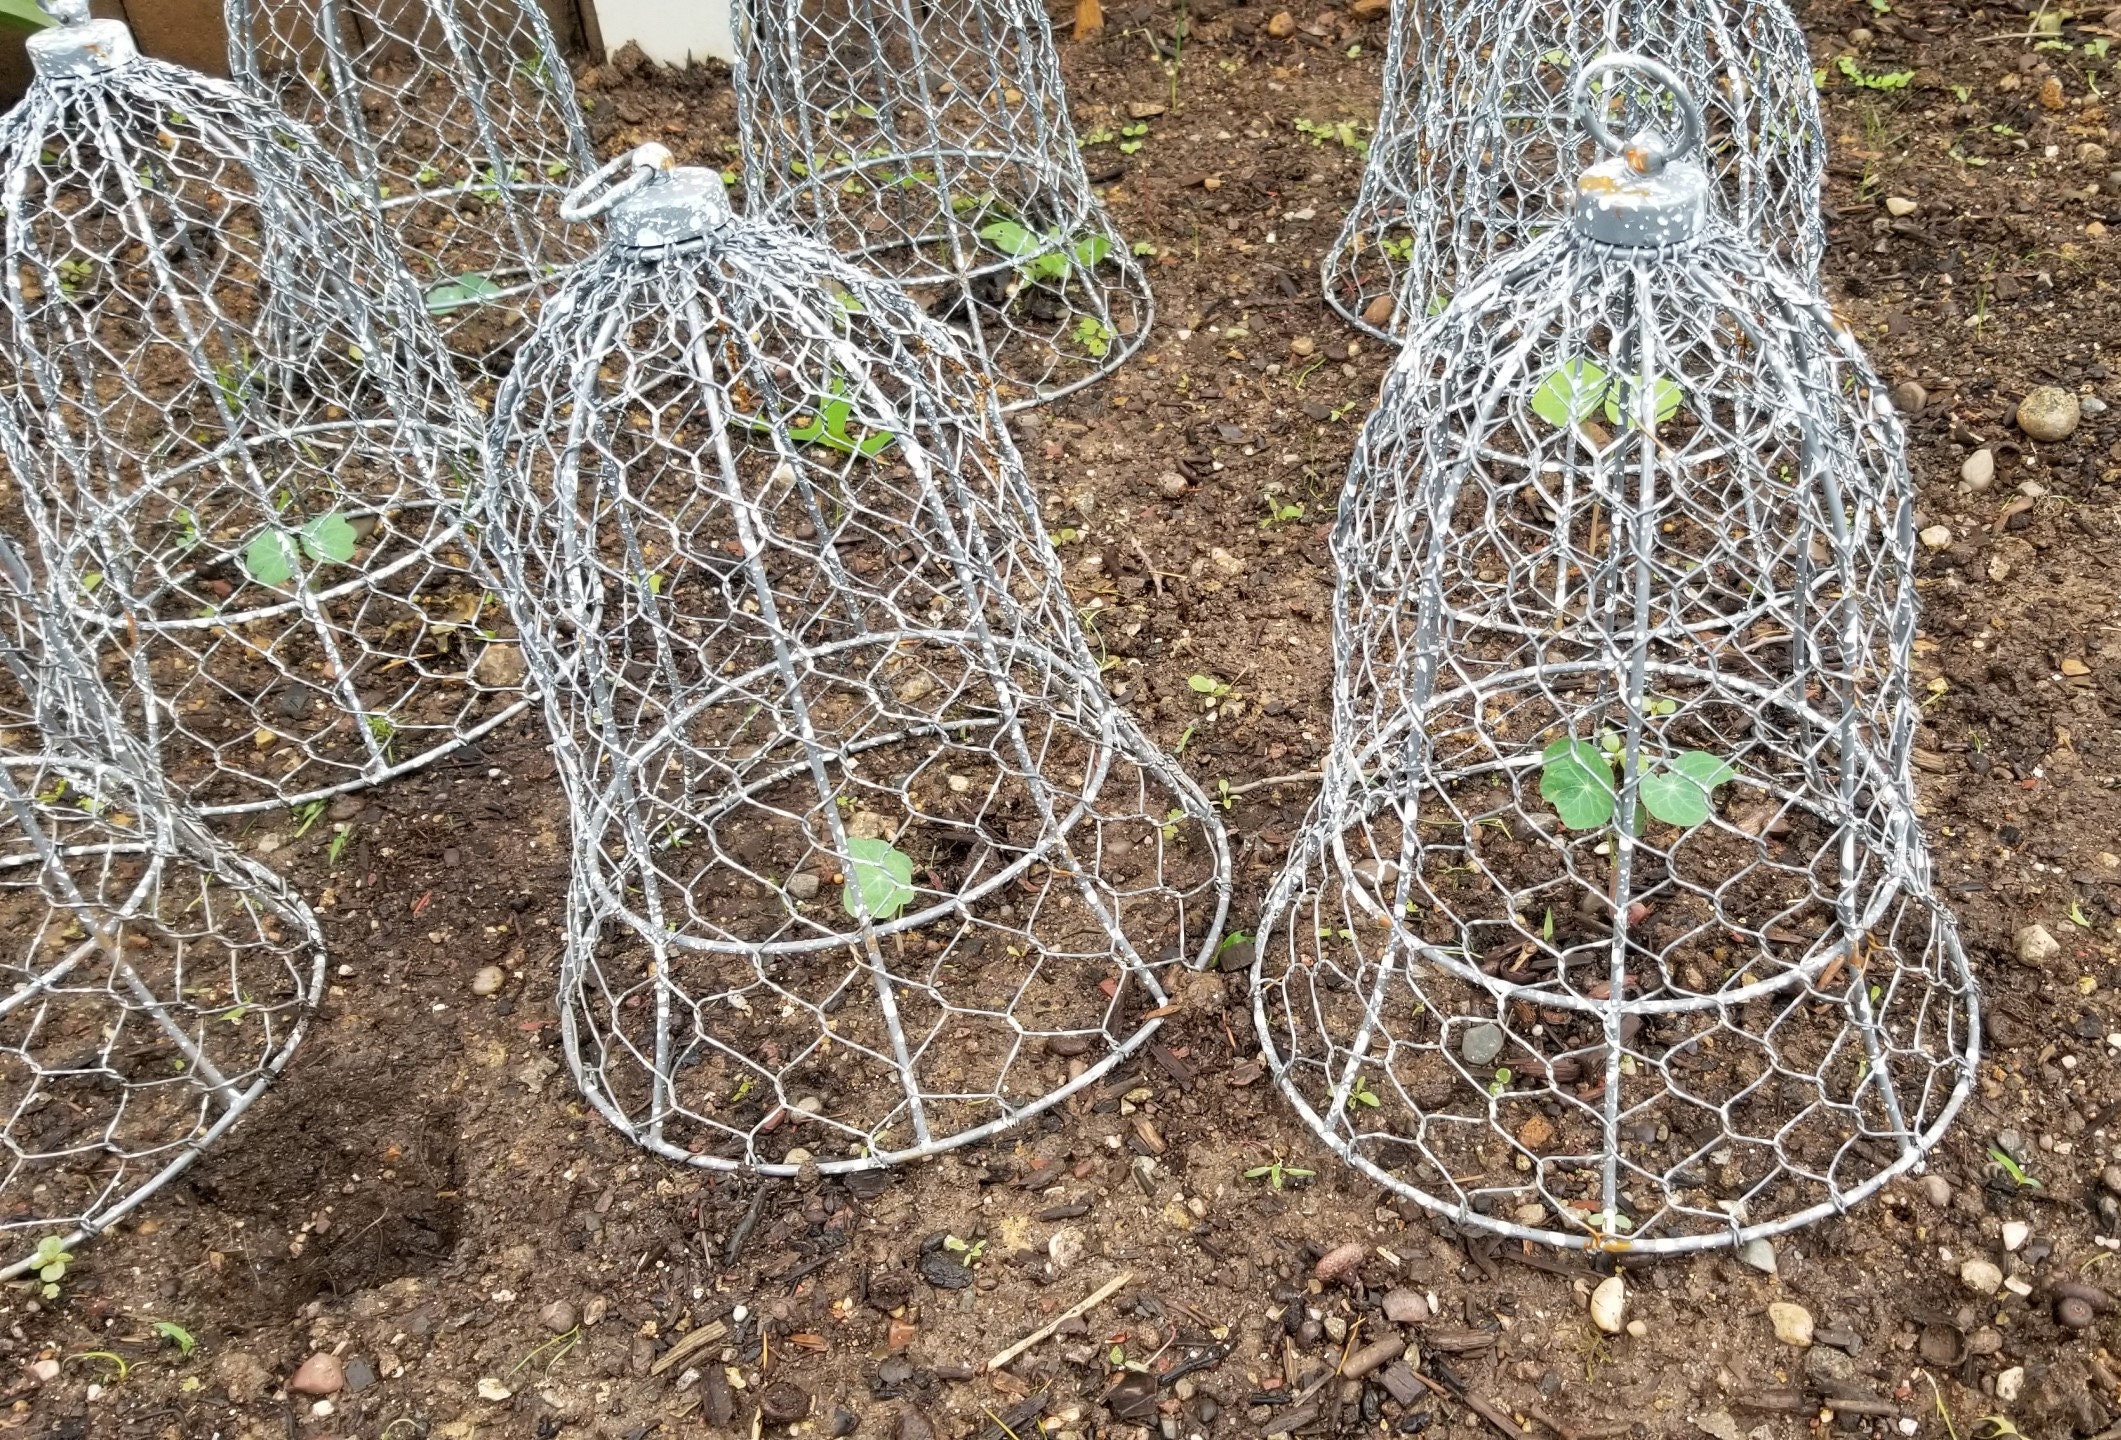 How to Make a Wire Cloche to Protect Plants from Hungry Critters